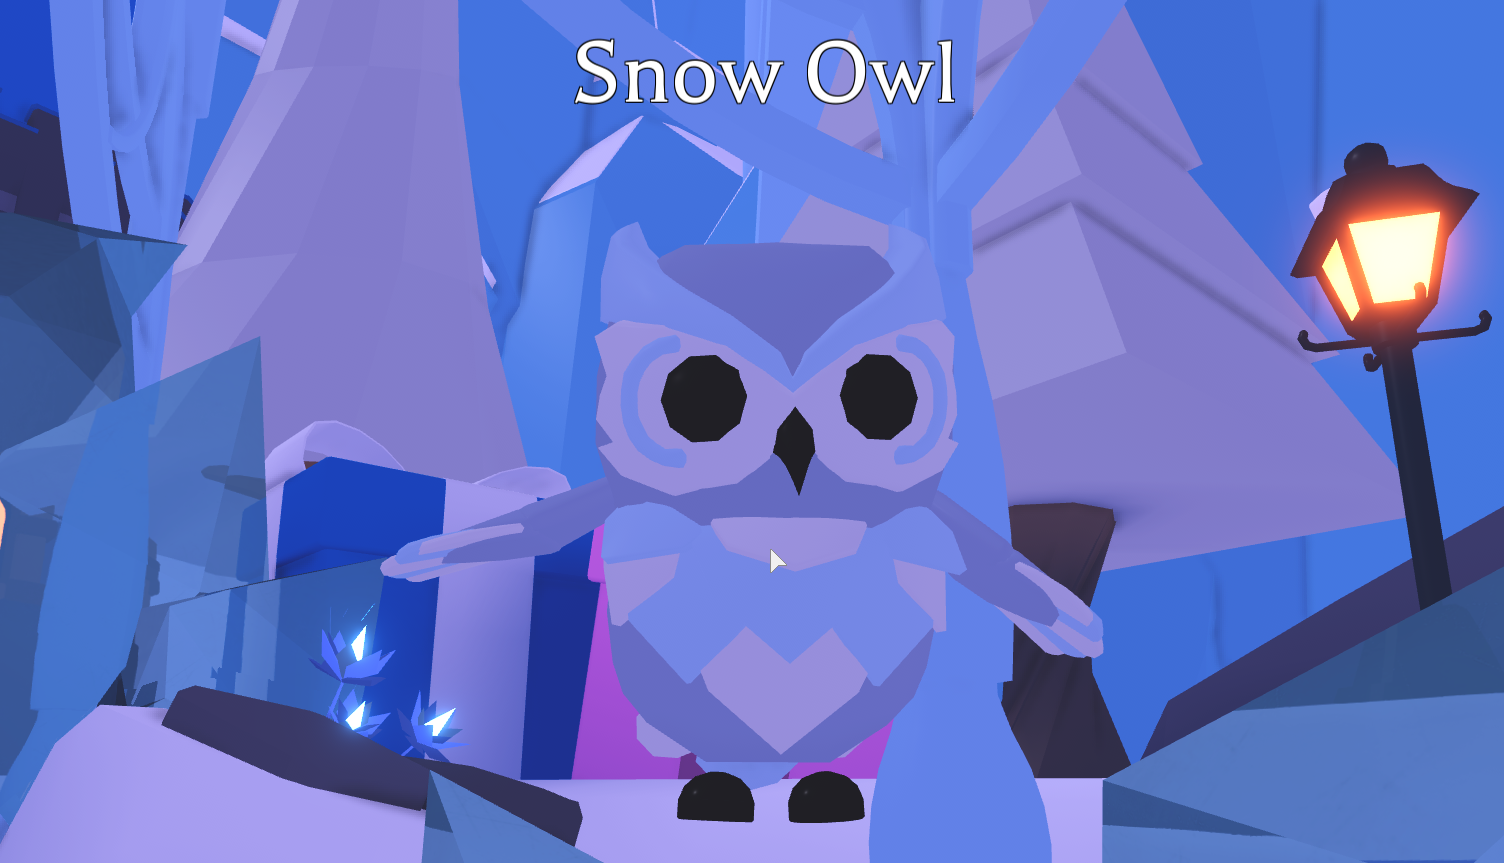 The most expensive pet on this list, the Snow Owl will cost you 10,000 Ging...